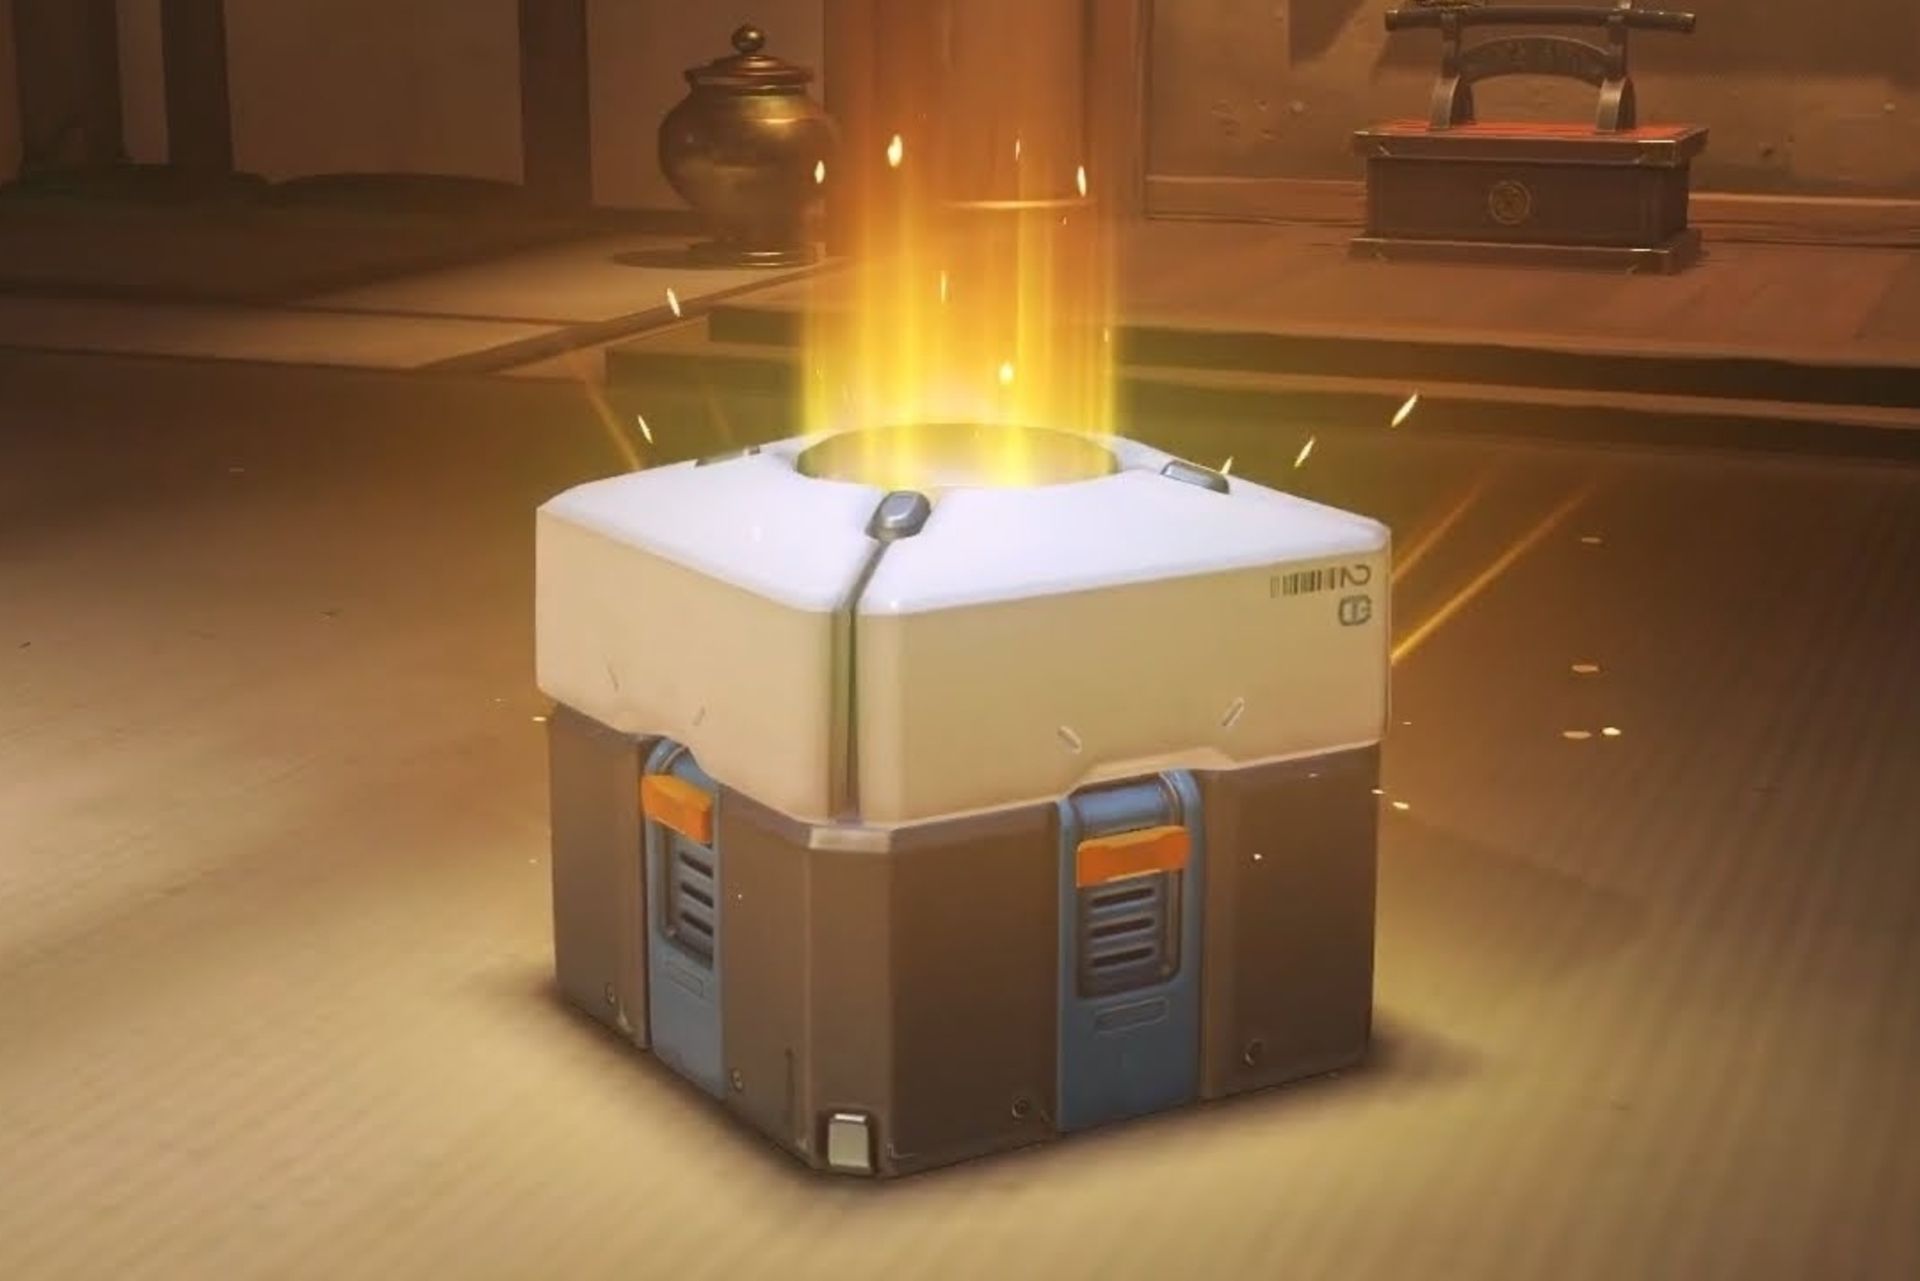 Petition Calls for Classifying Loot Boxes as a Form of Gambling